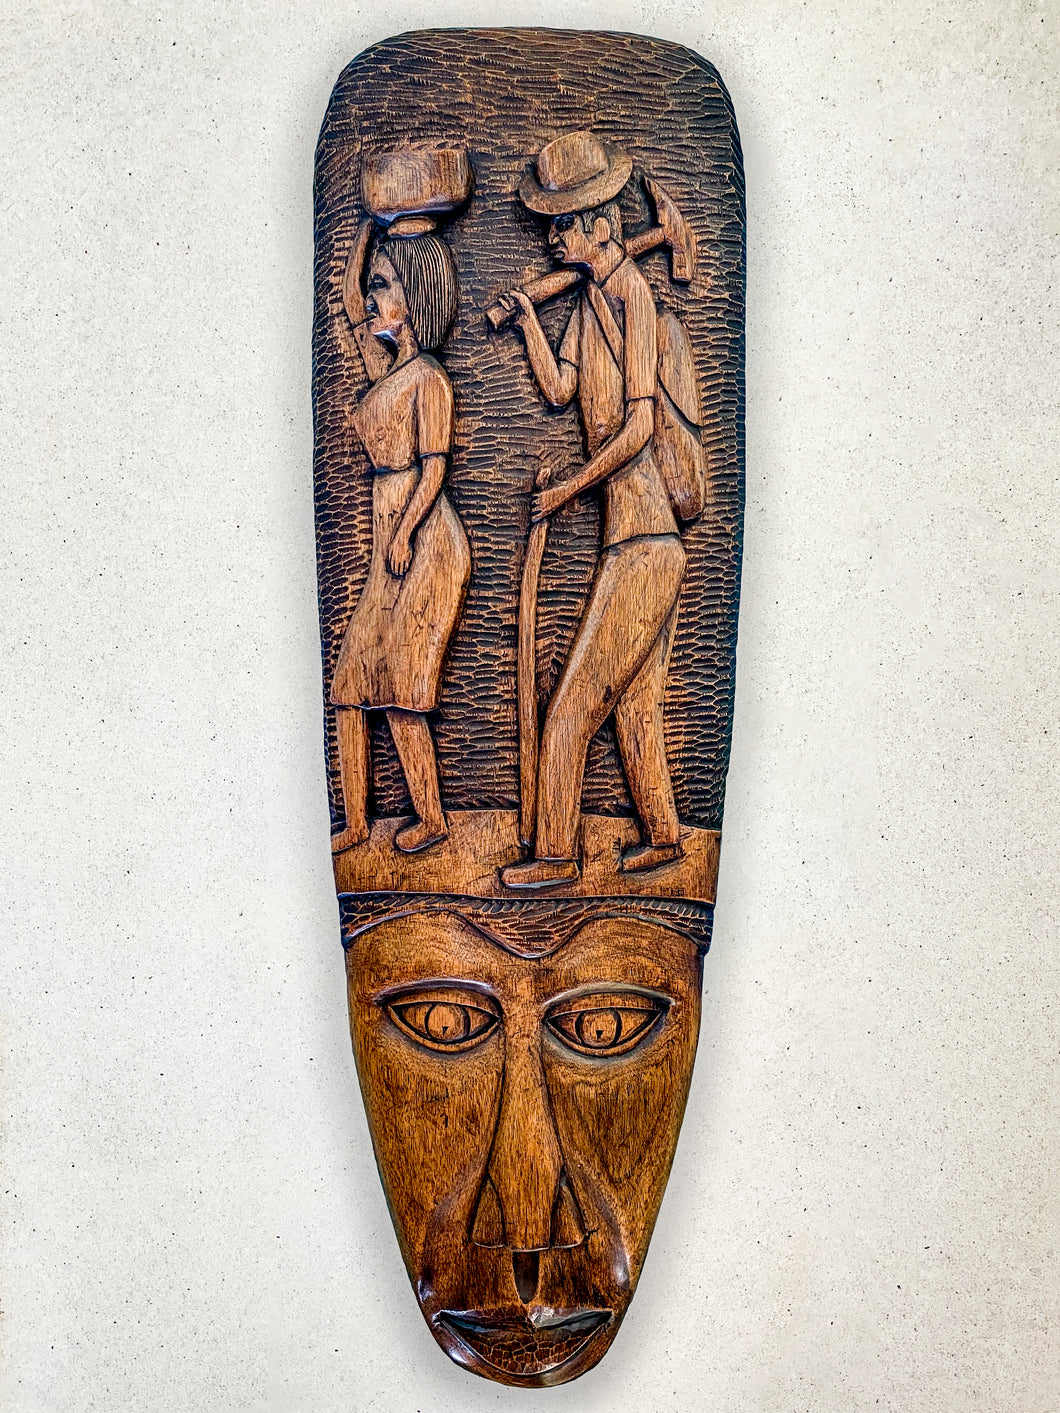 Wood Carvings - Mask with Farmers